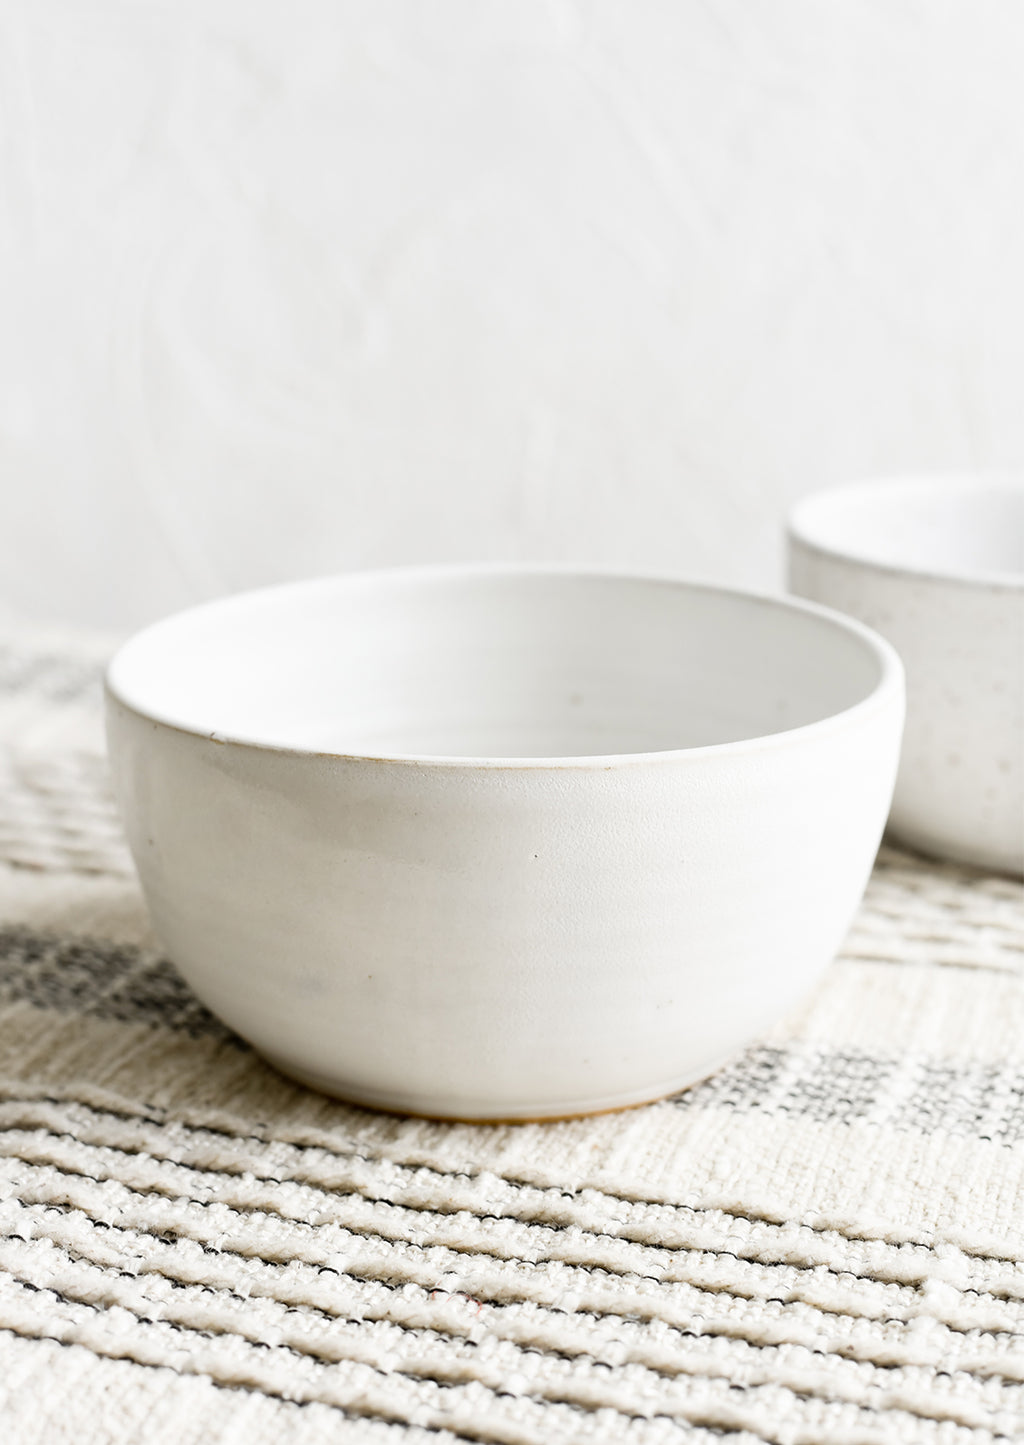 Matte White / Cereal Bowl: A ceramic cereal bowl in white.